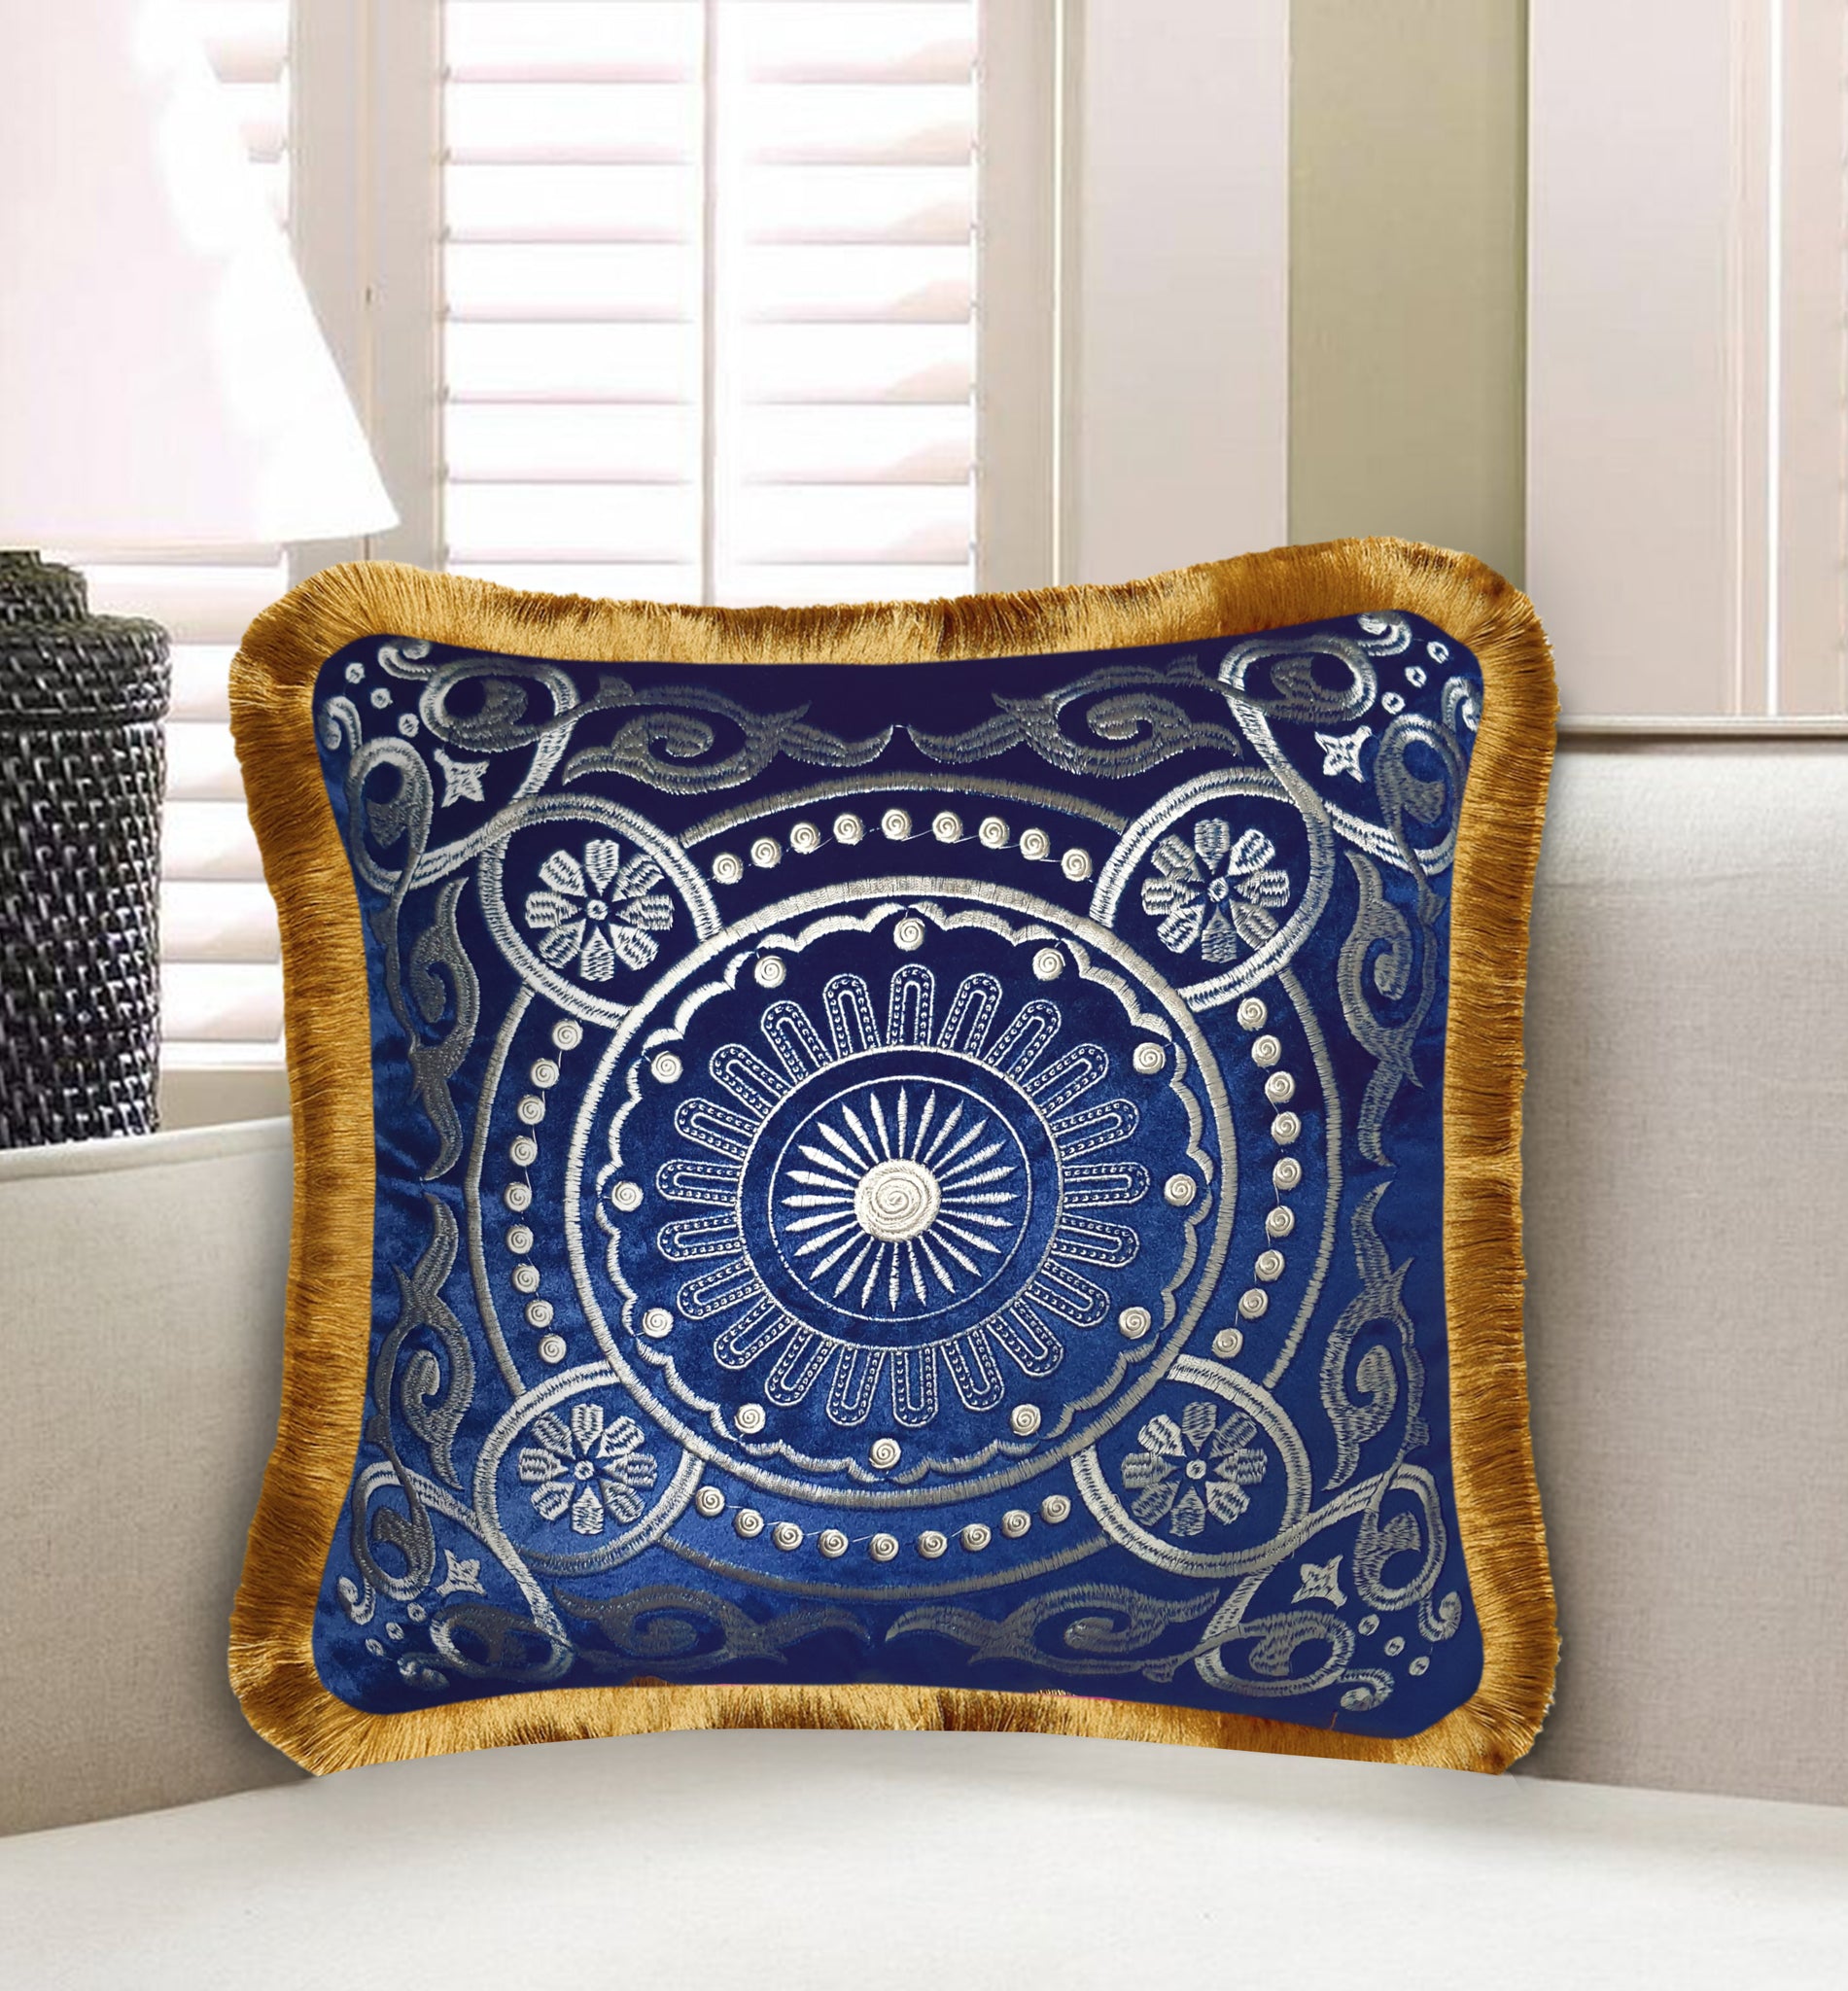 Velvet Cushion Cover Embroidery Baroque Motif Decorative Pillow European Style Home Decor Throw Pillow for Sofa Chair Living Room 45x45 cm 18x18 In